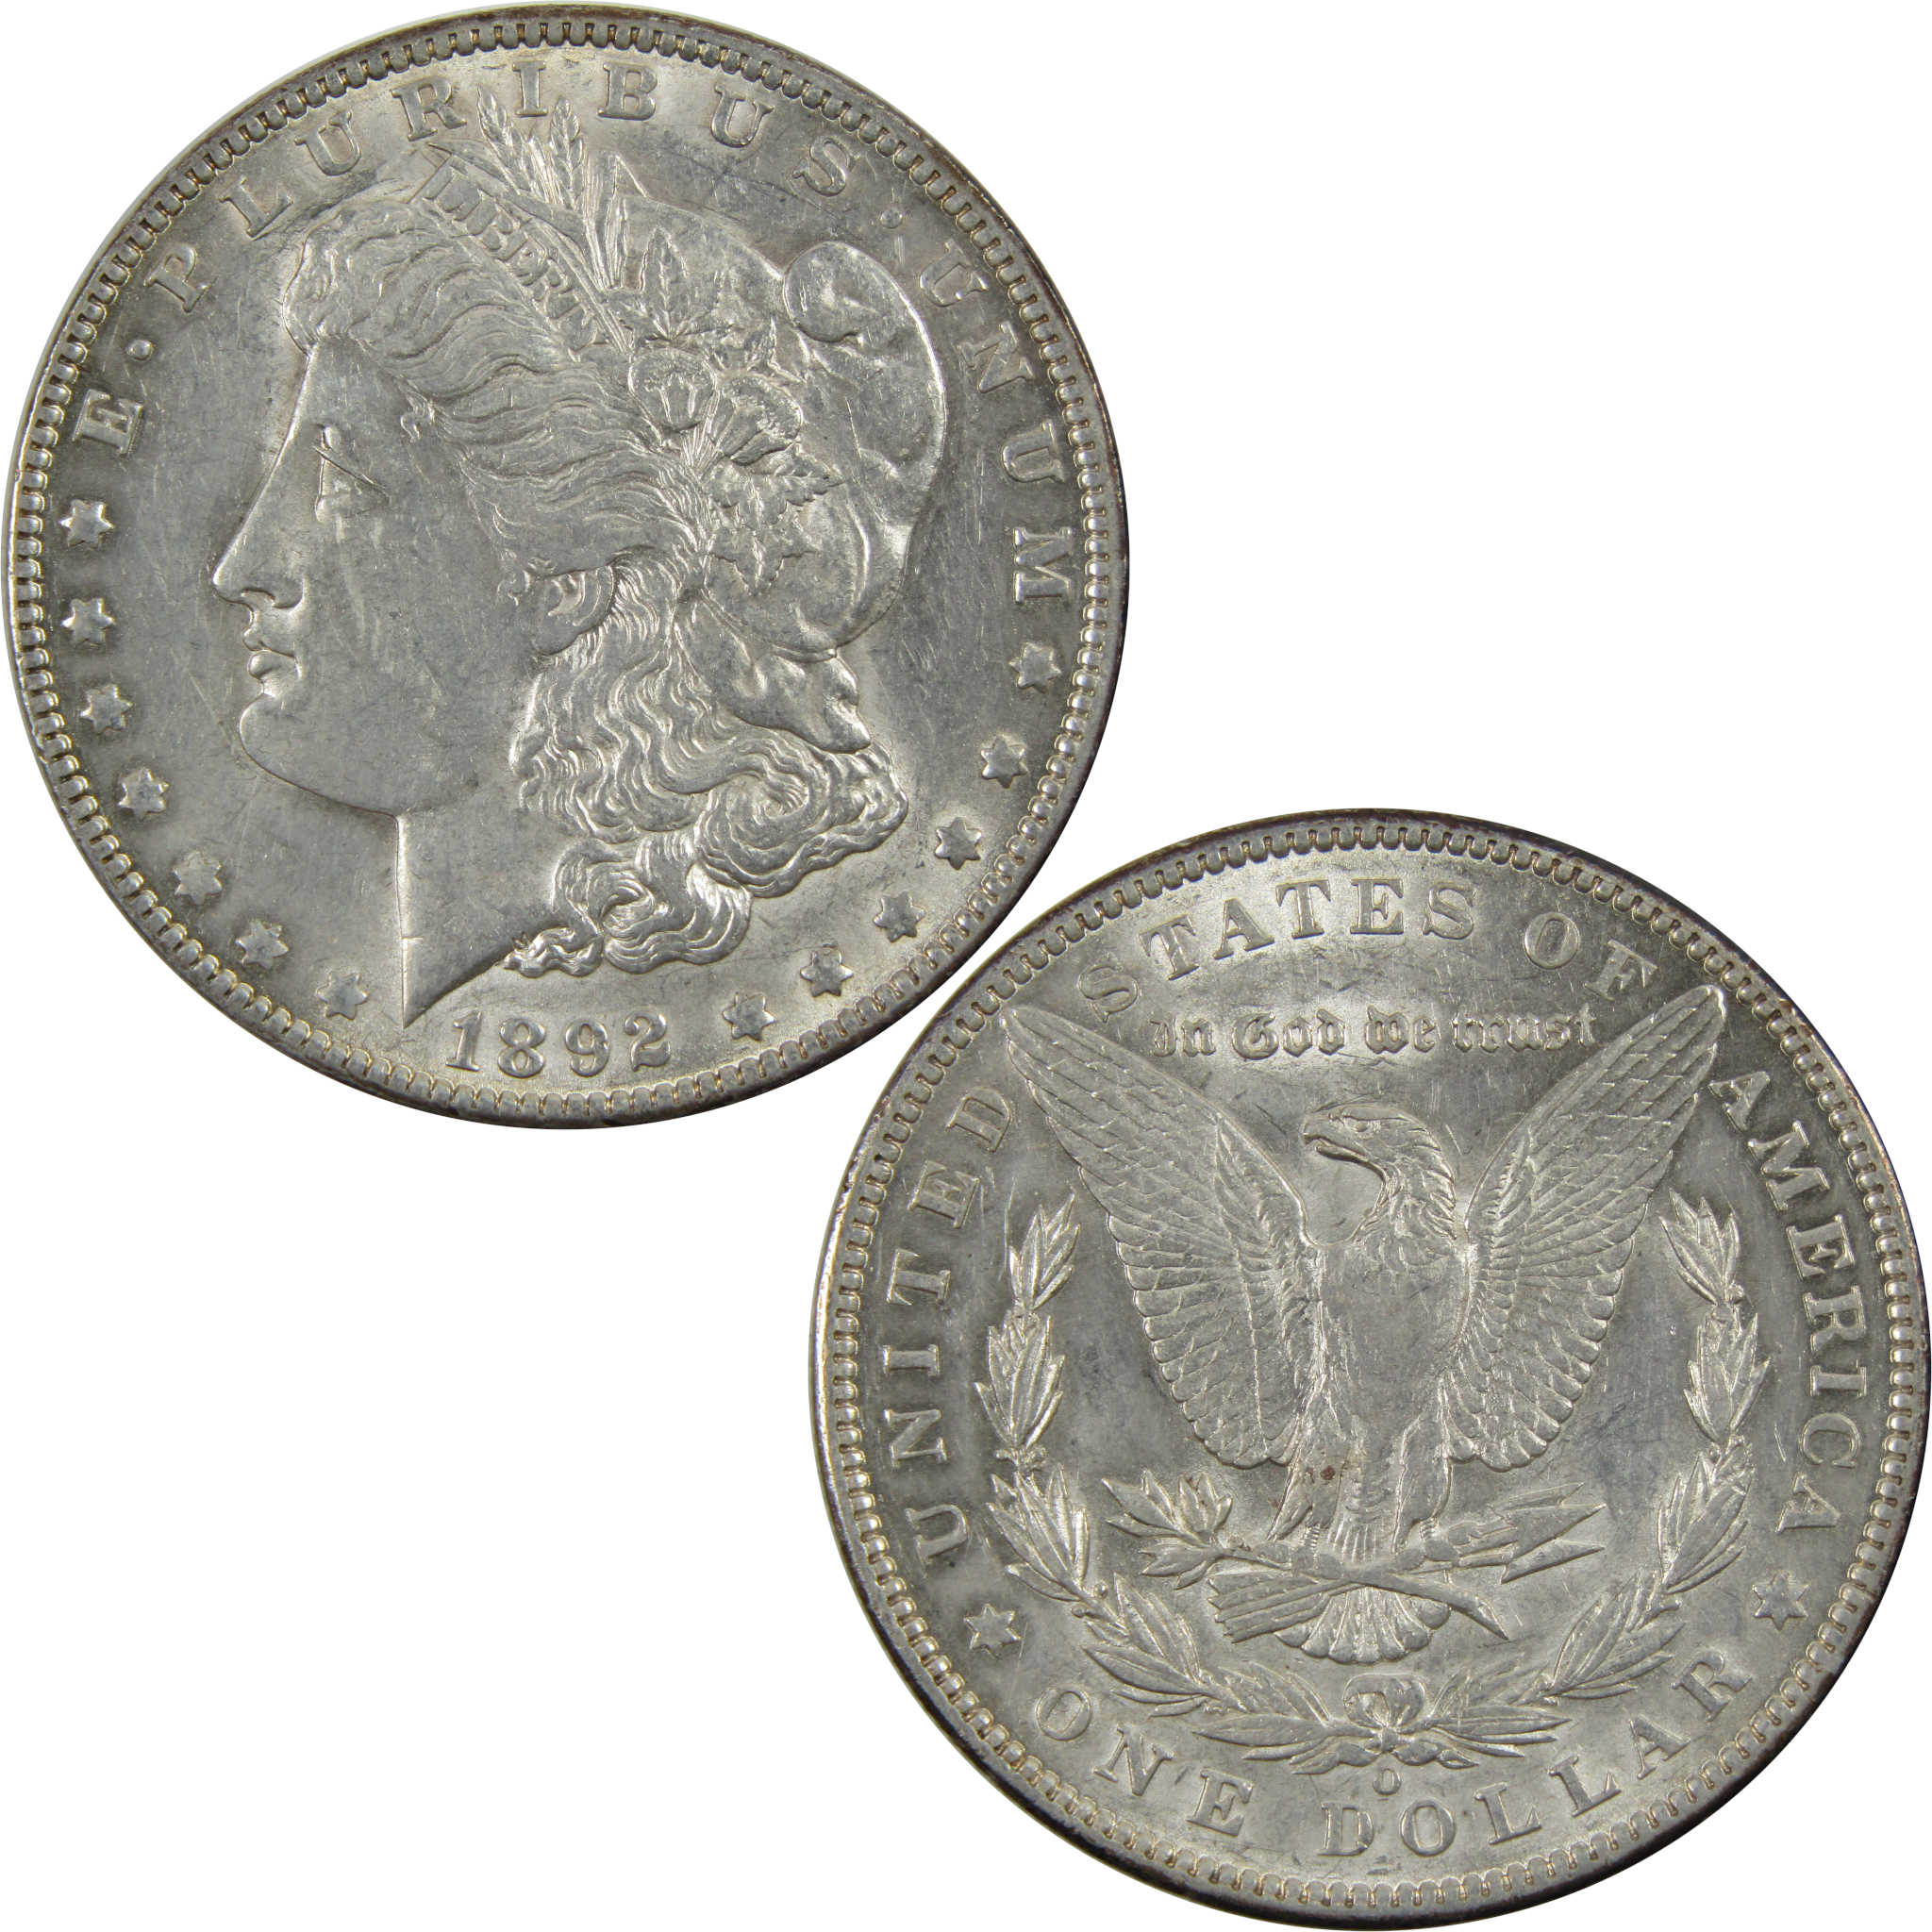 1892 O Morgan Dollar AU About Uncirculated 90% Silver SKU:I4843 - Morgan coin - Morgan silver dollar - Morgan silver dollar for sale - Profile Coins &amp; Collectibles